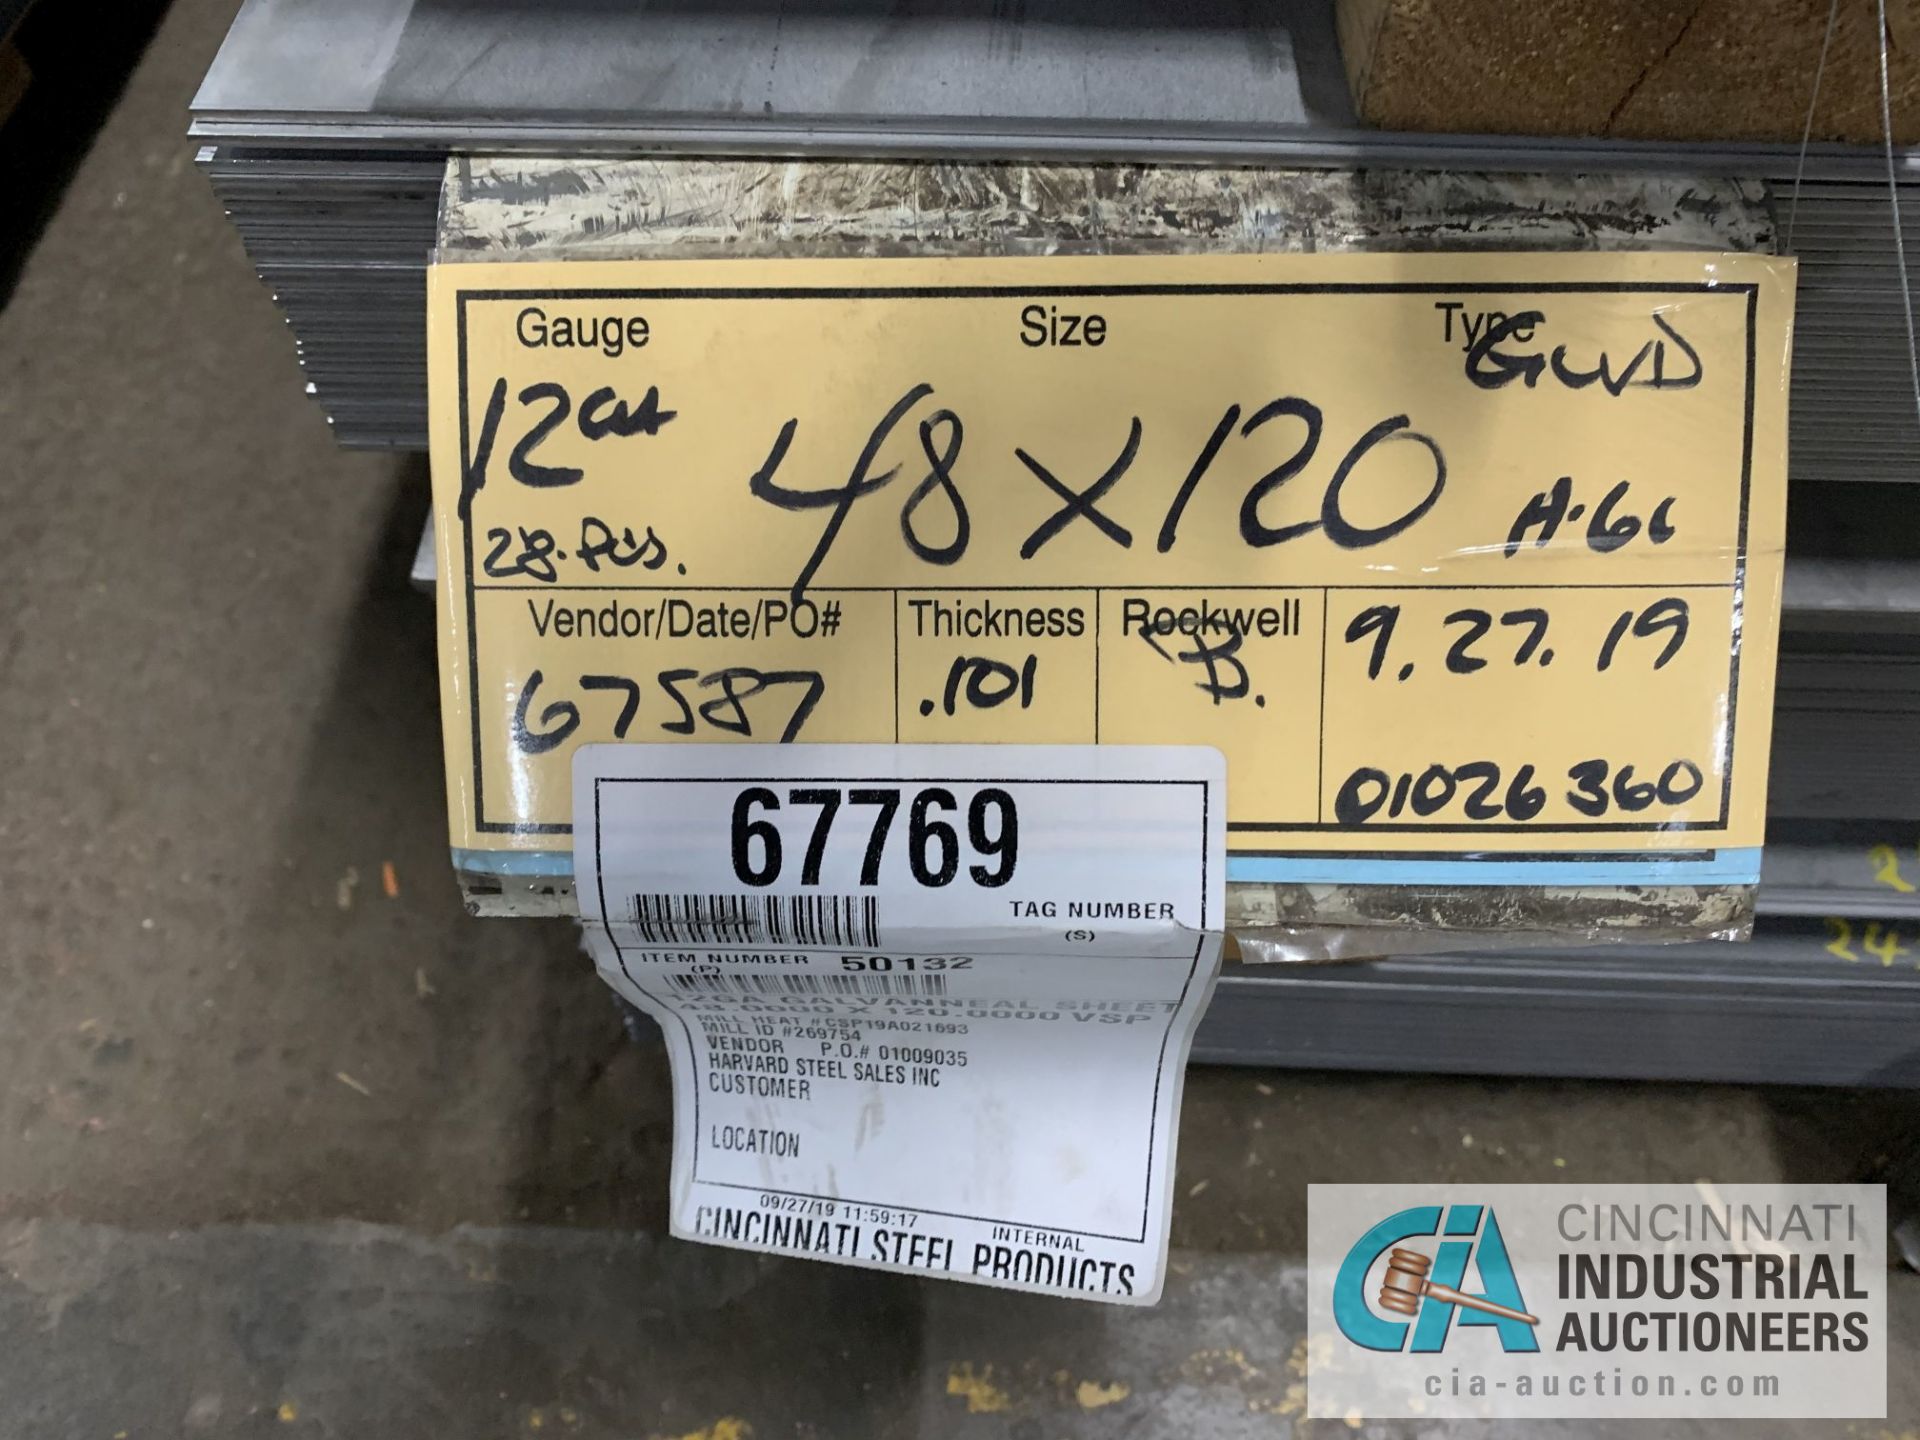 (LOT) APPROX. 26,619 LBS. COATED SHEET STEEL, 1-STACK, 8-BUNDLES, SEE INVENTORY FOR LISTING. - Image 5 of 9